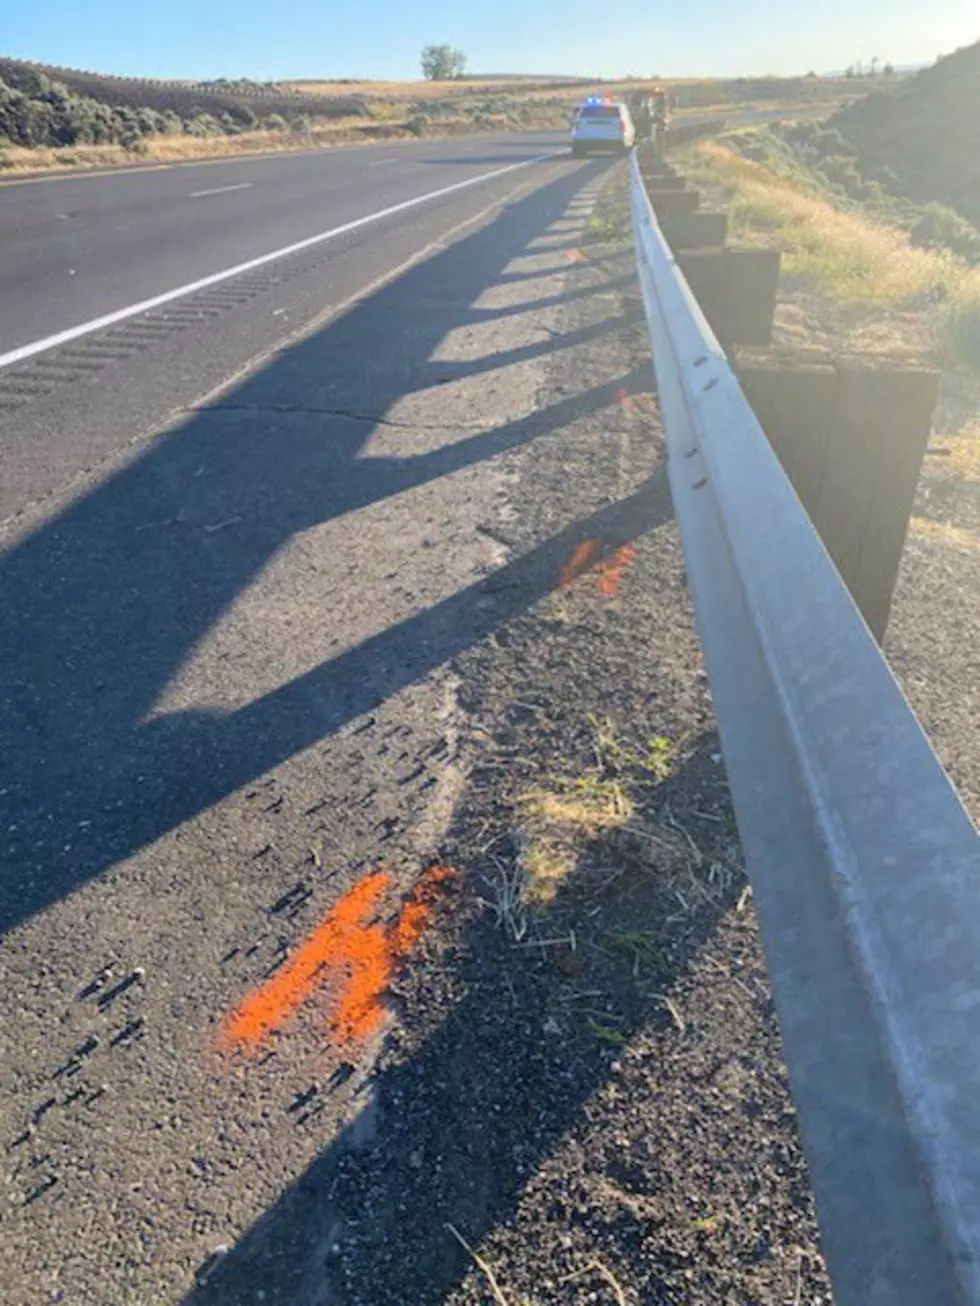 Motorcyclist Collides with Guardrail in Ellensburg, Airlifted to Seattle